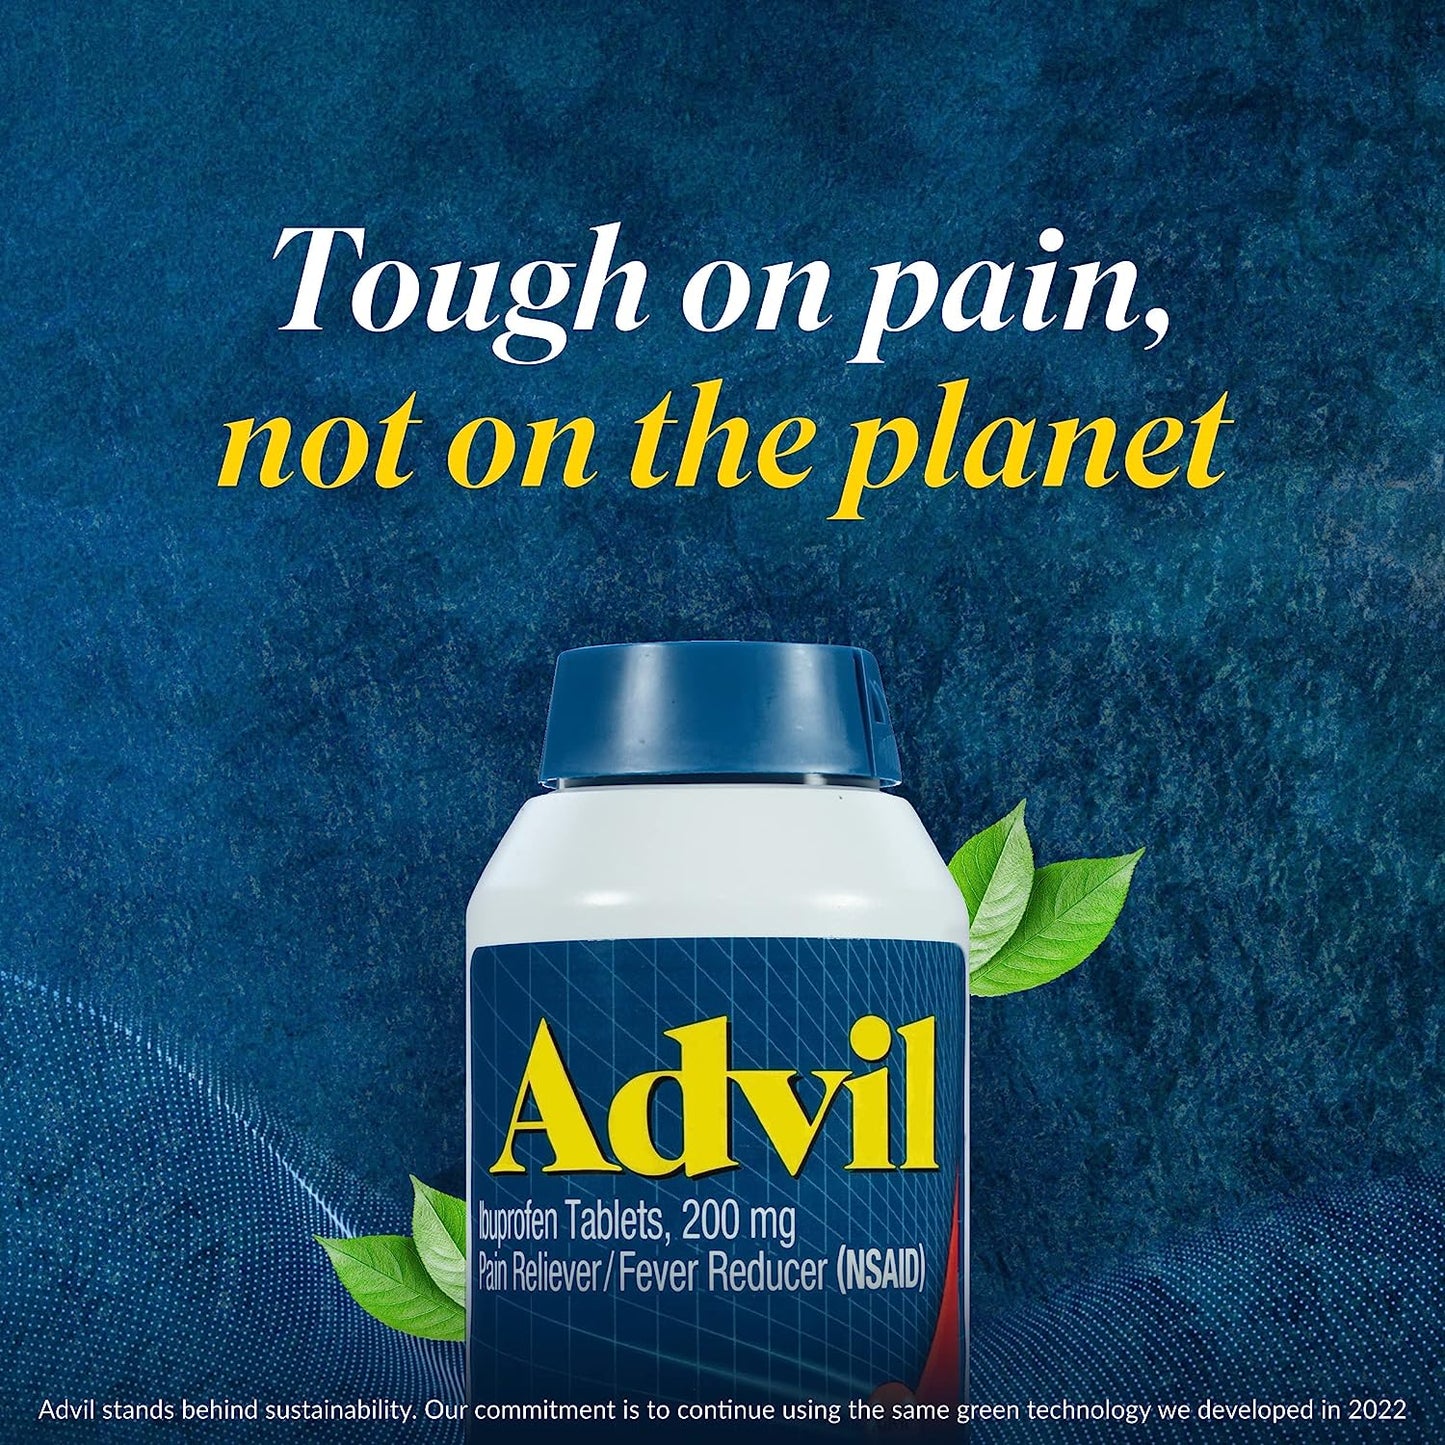 Advil Pain Reliever and Fever Reducer Ibuprofen 200mg - 50 Coated Tablets